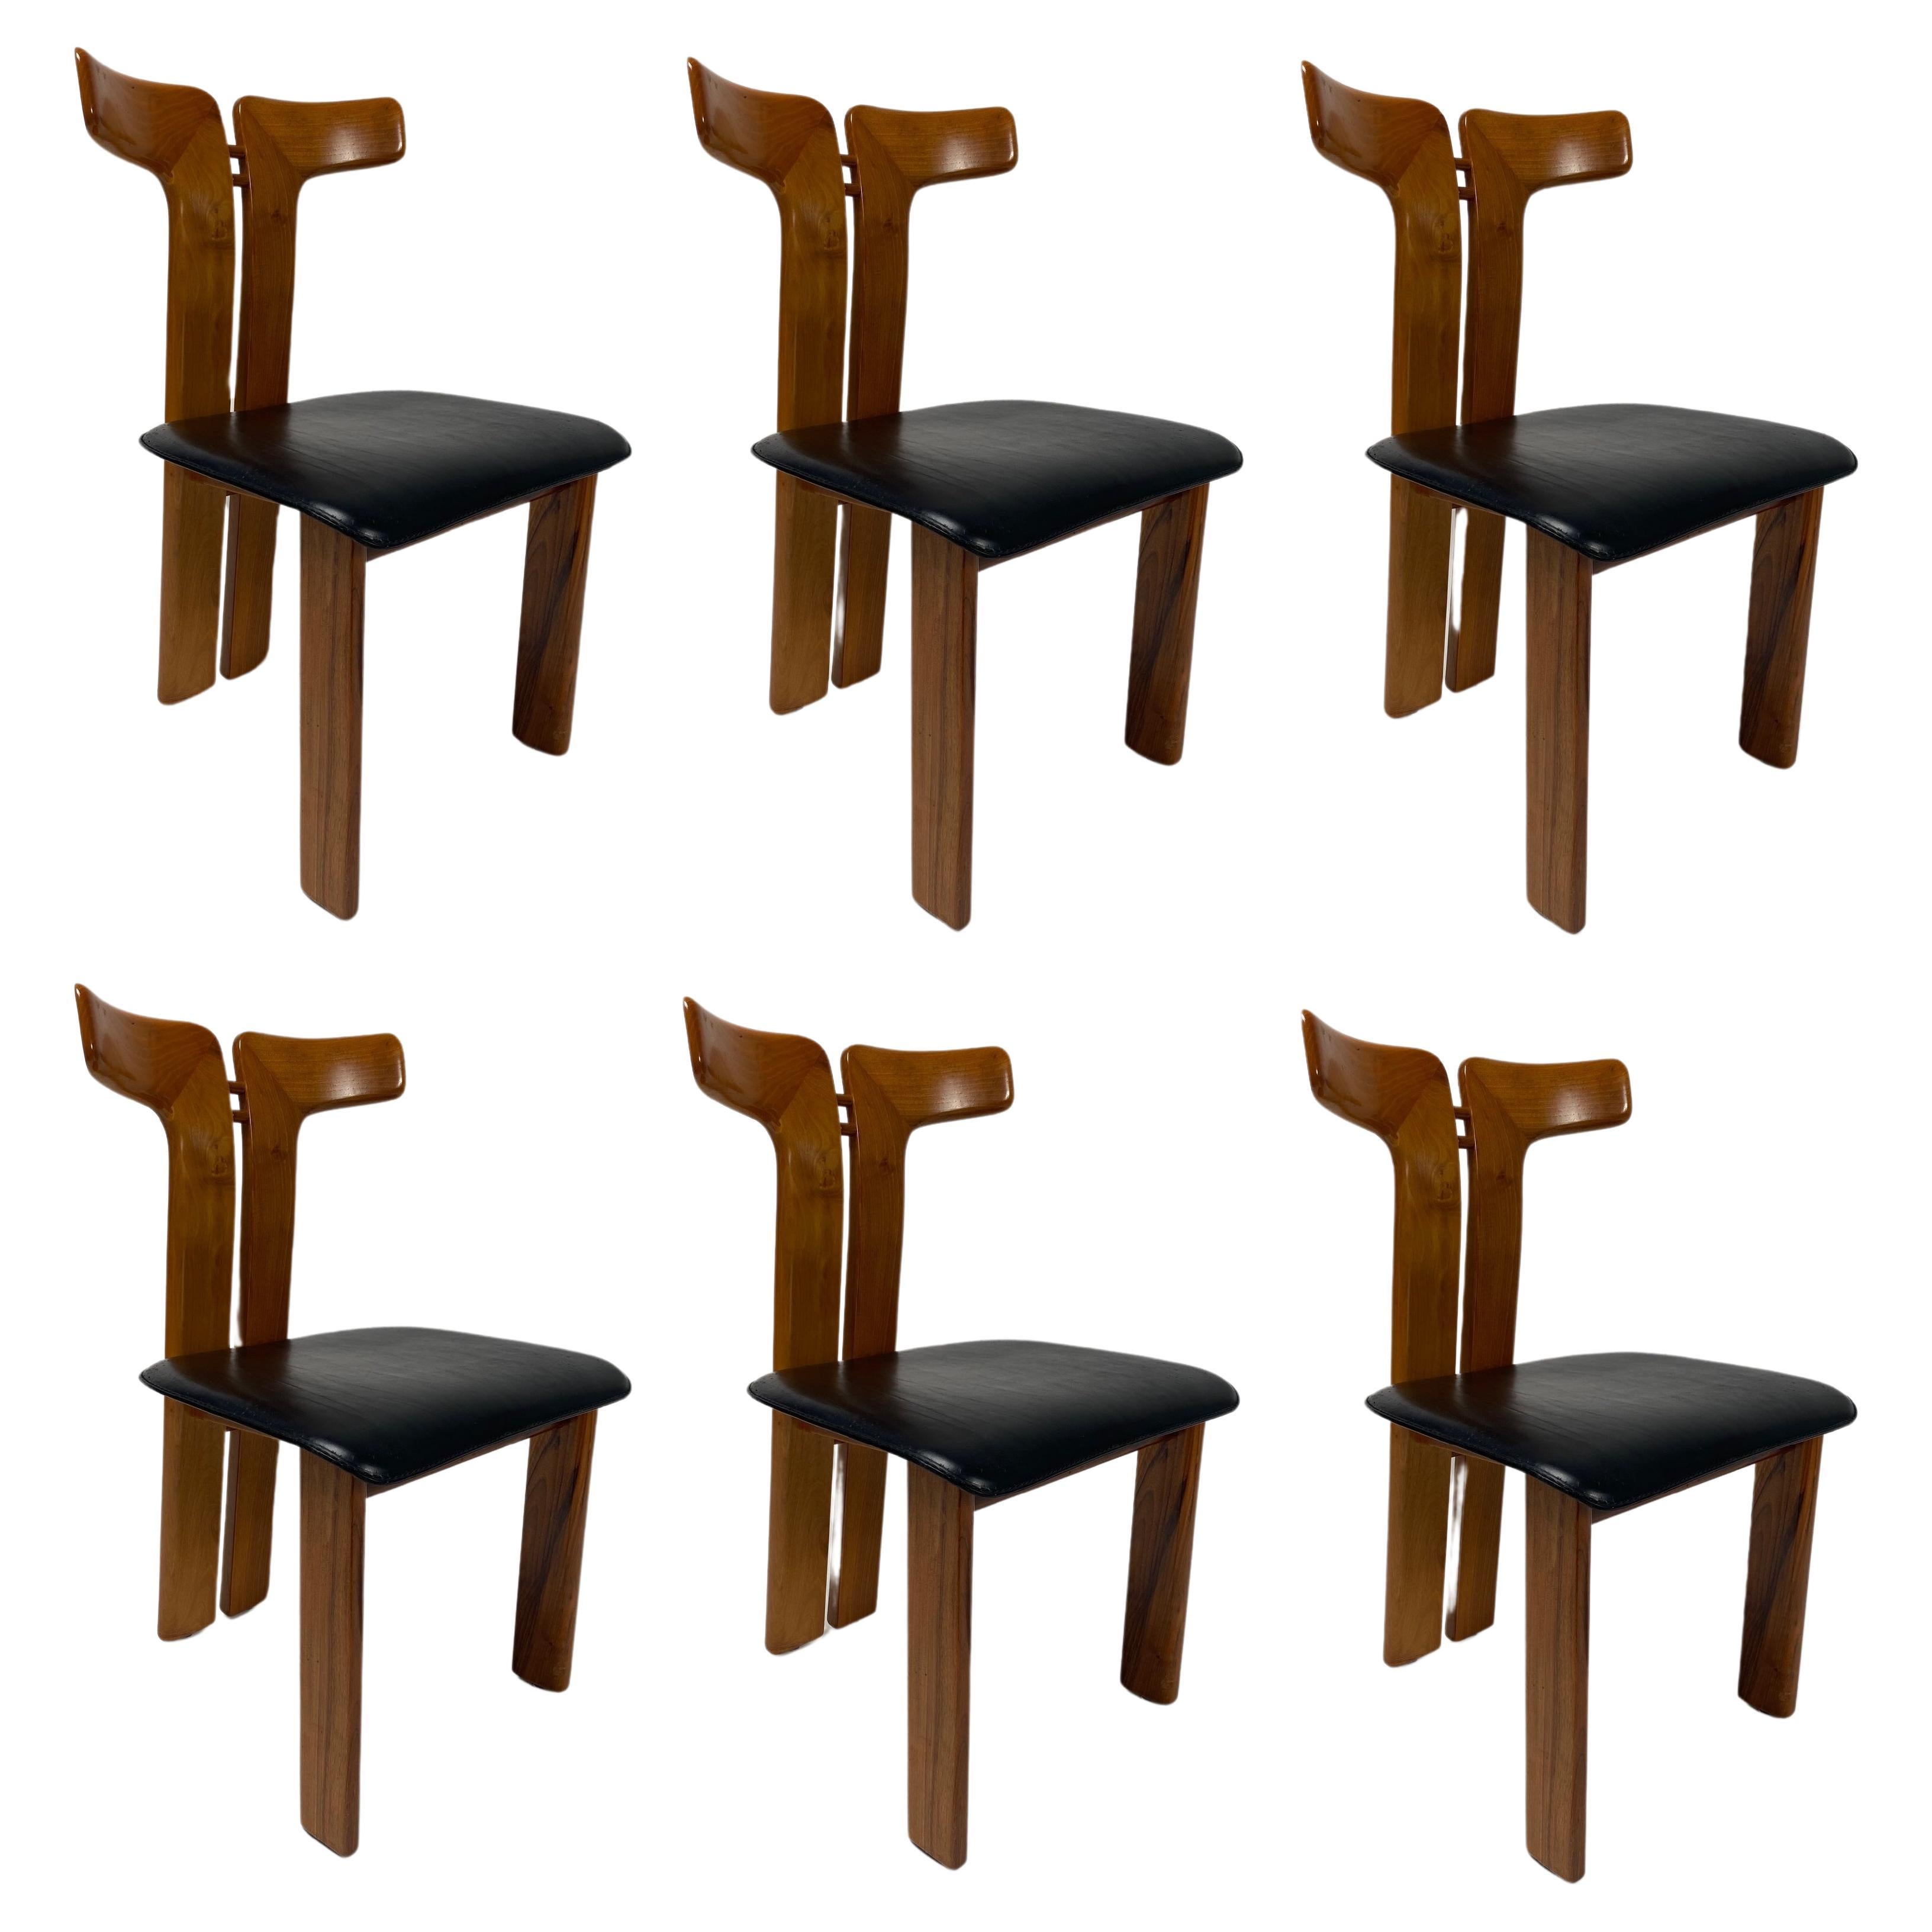 Pierre Cardin, 6 Dining Chairs in Walnut and Leather, 1970s